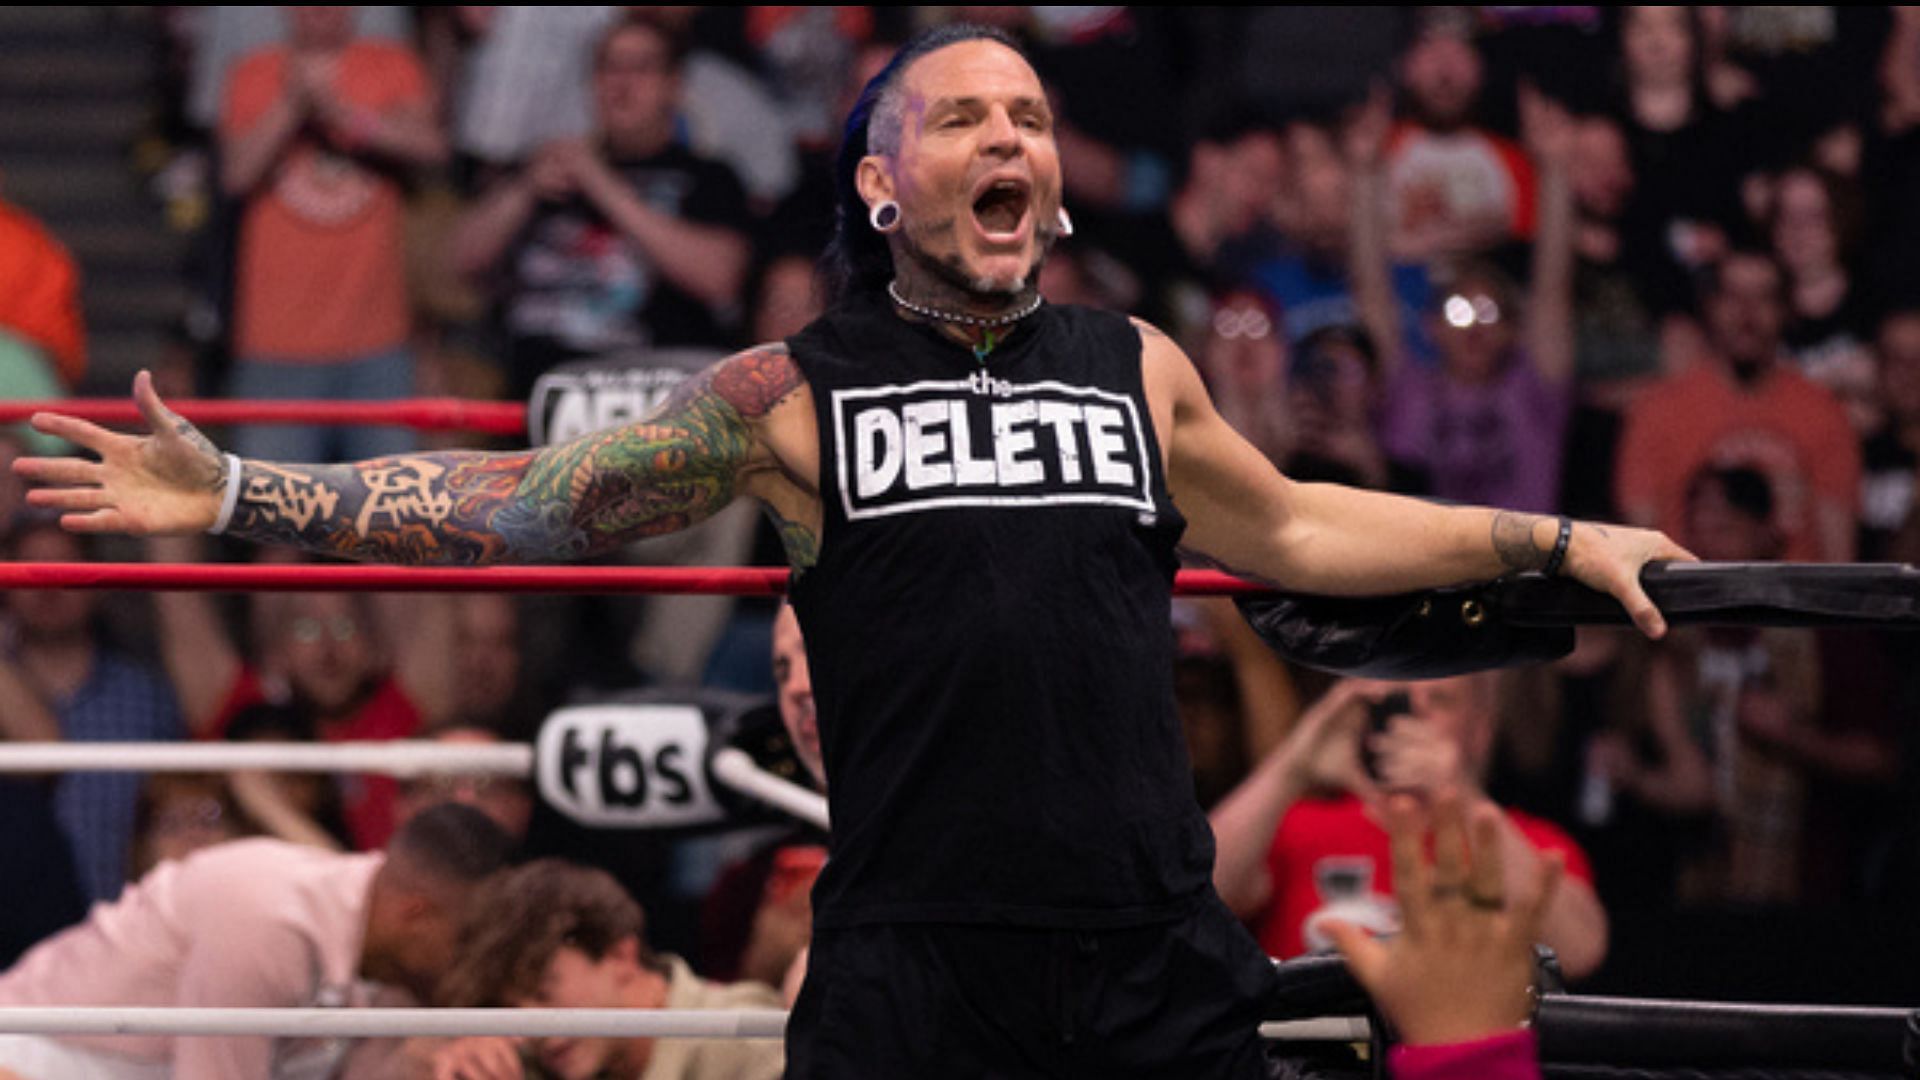 Jeff Hardy is a current AEW star